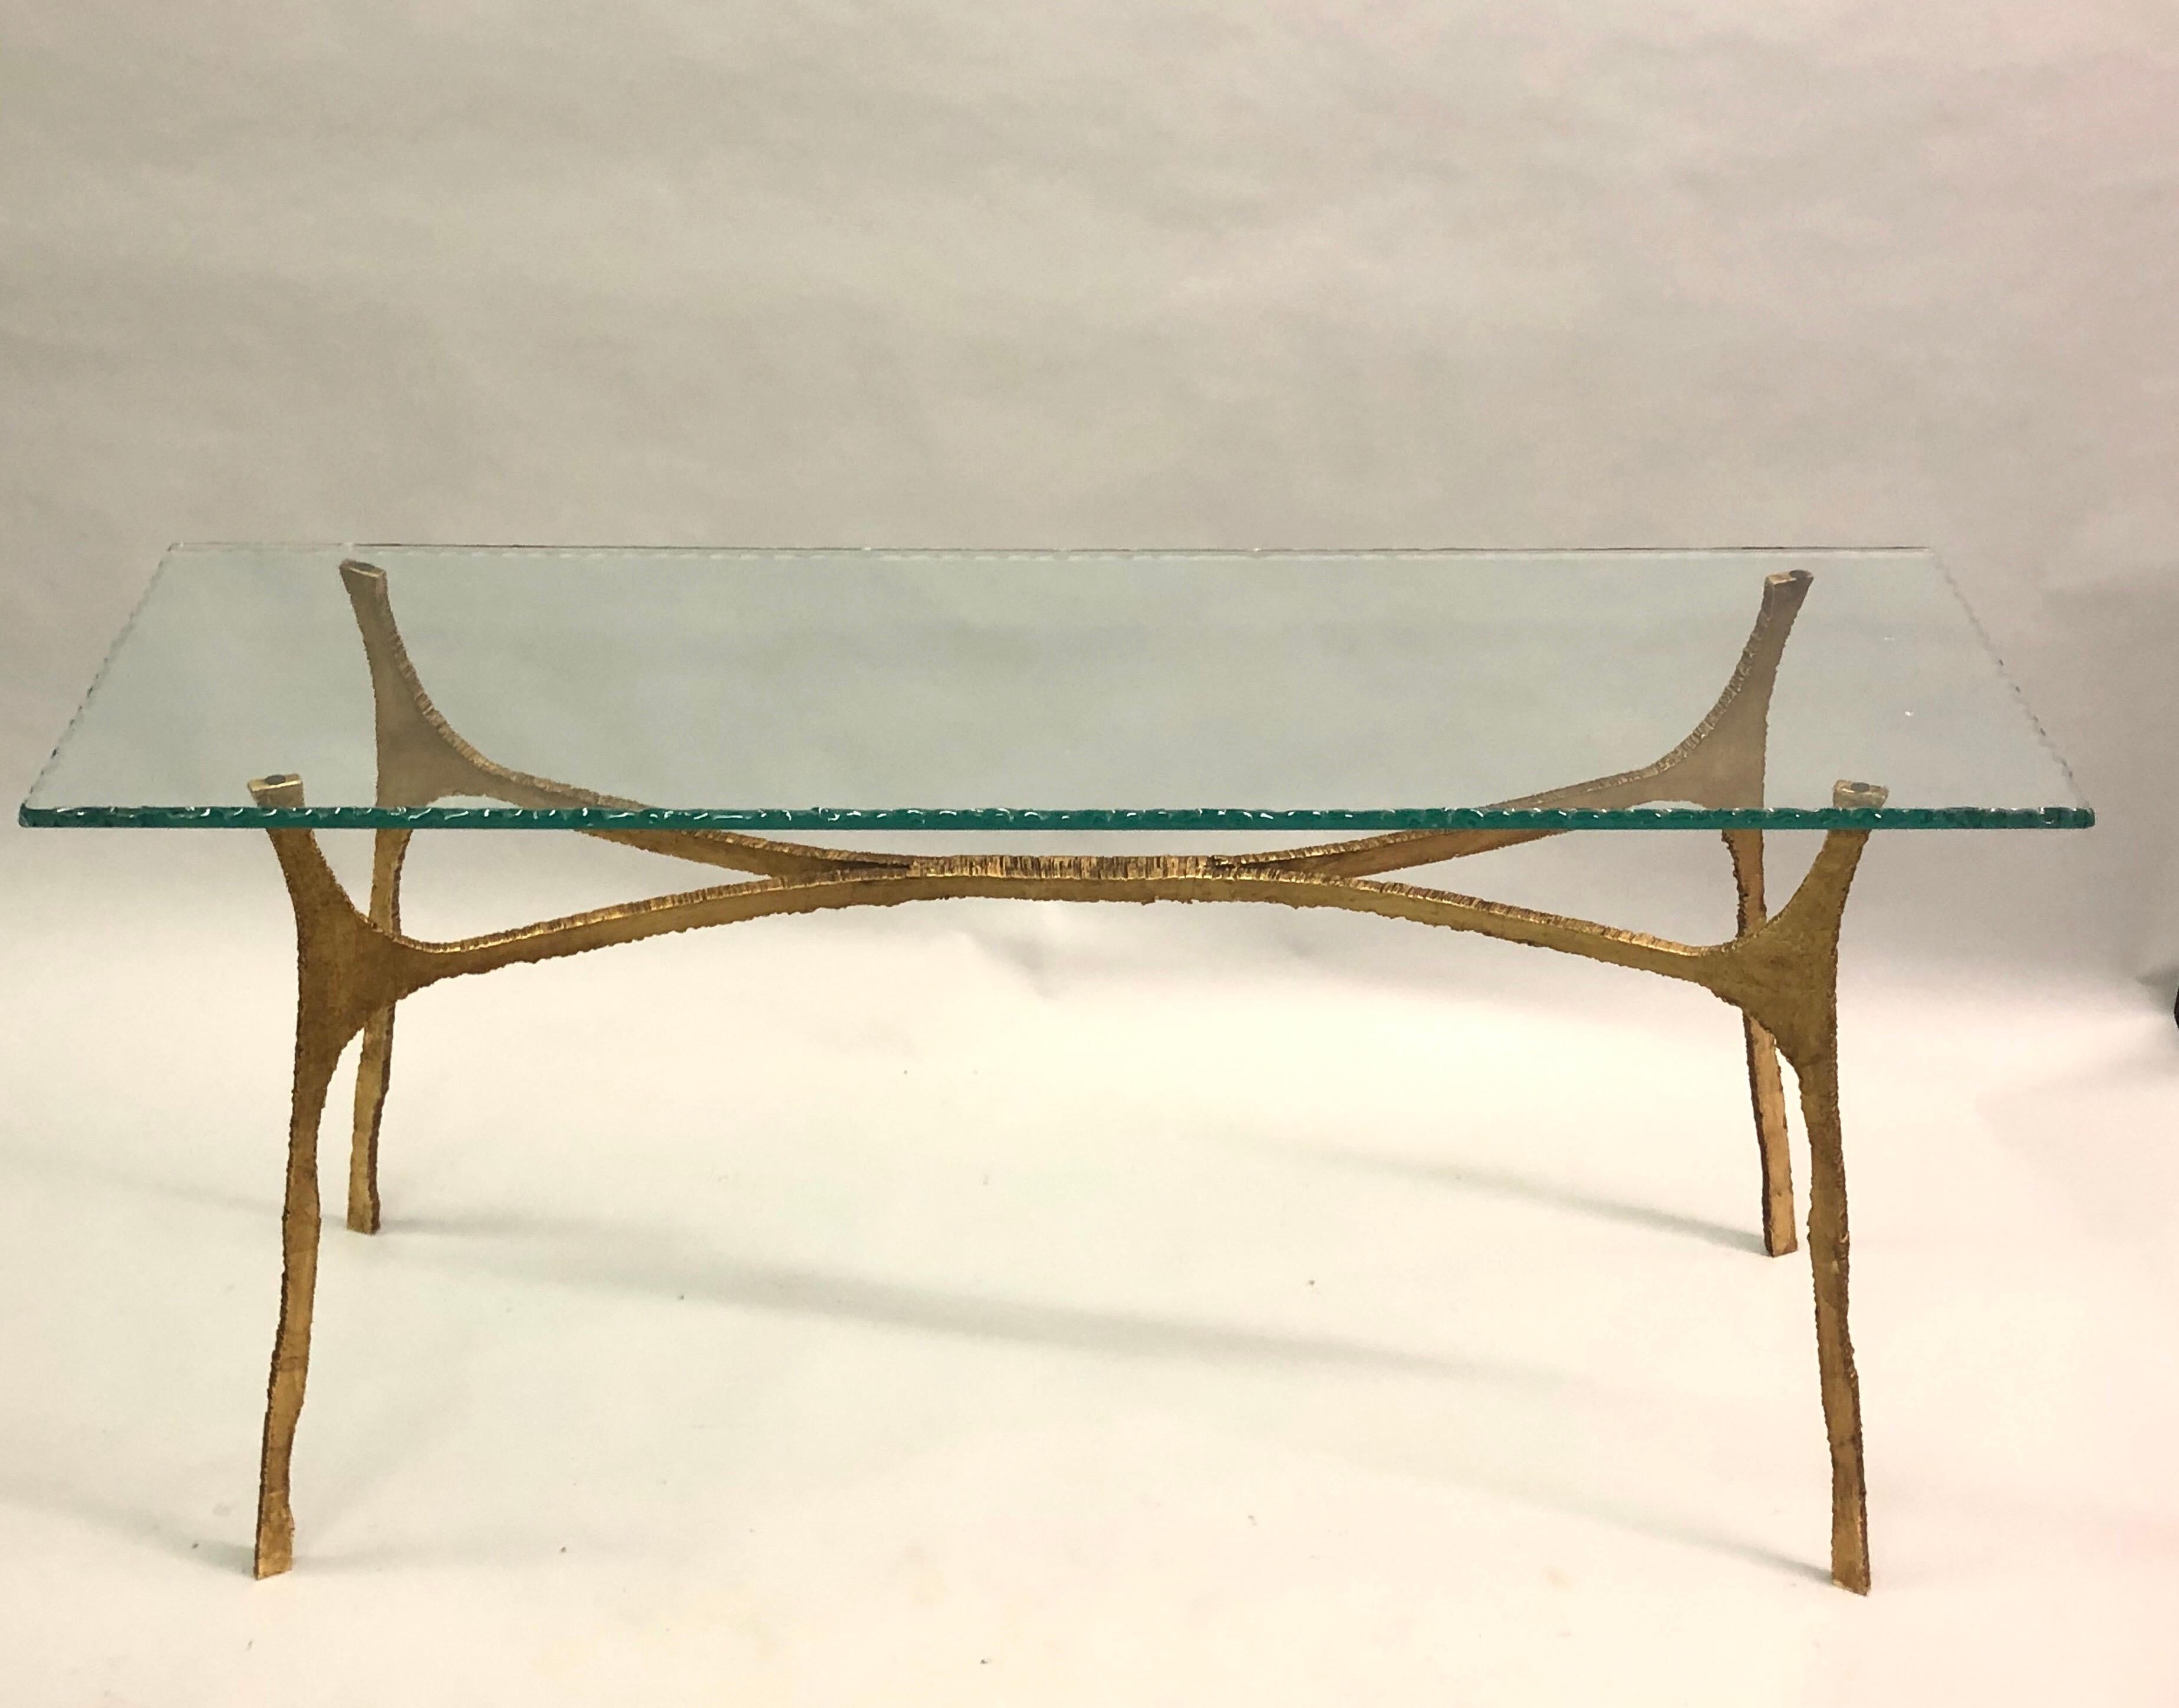 Elegant and chic Italian Mid-Century Modern / Brutalist console or sofa table in hand hammered and gilt wrought iron by Florentine sculptor, Giovanni Banci, circa 1965-1970. Banci completes the piece with a stunning hand chiseled, thick green glass